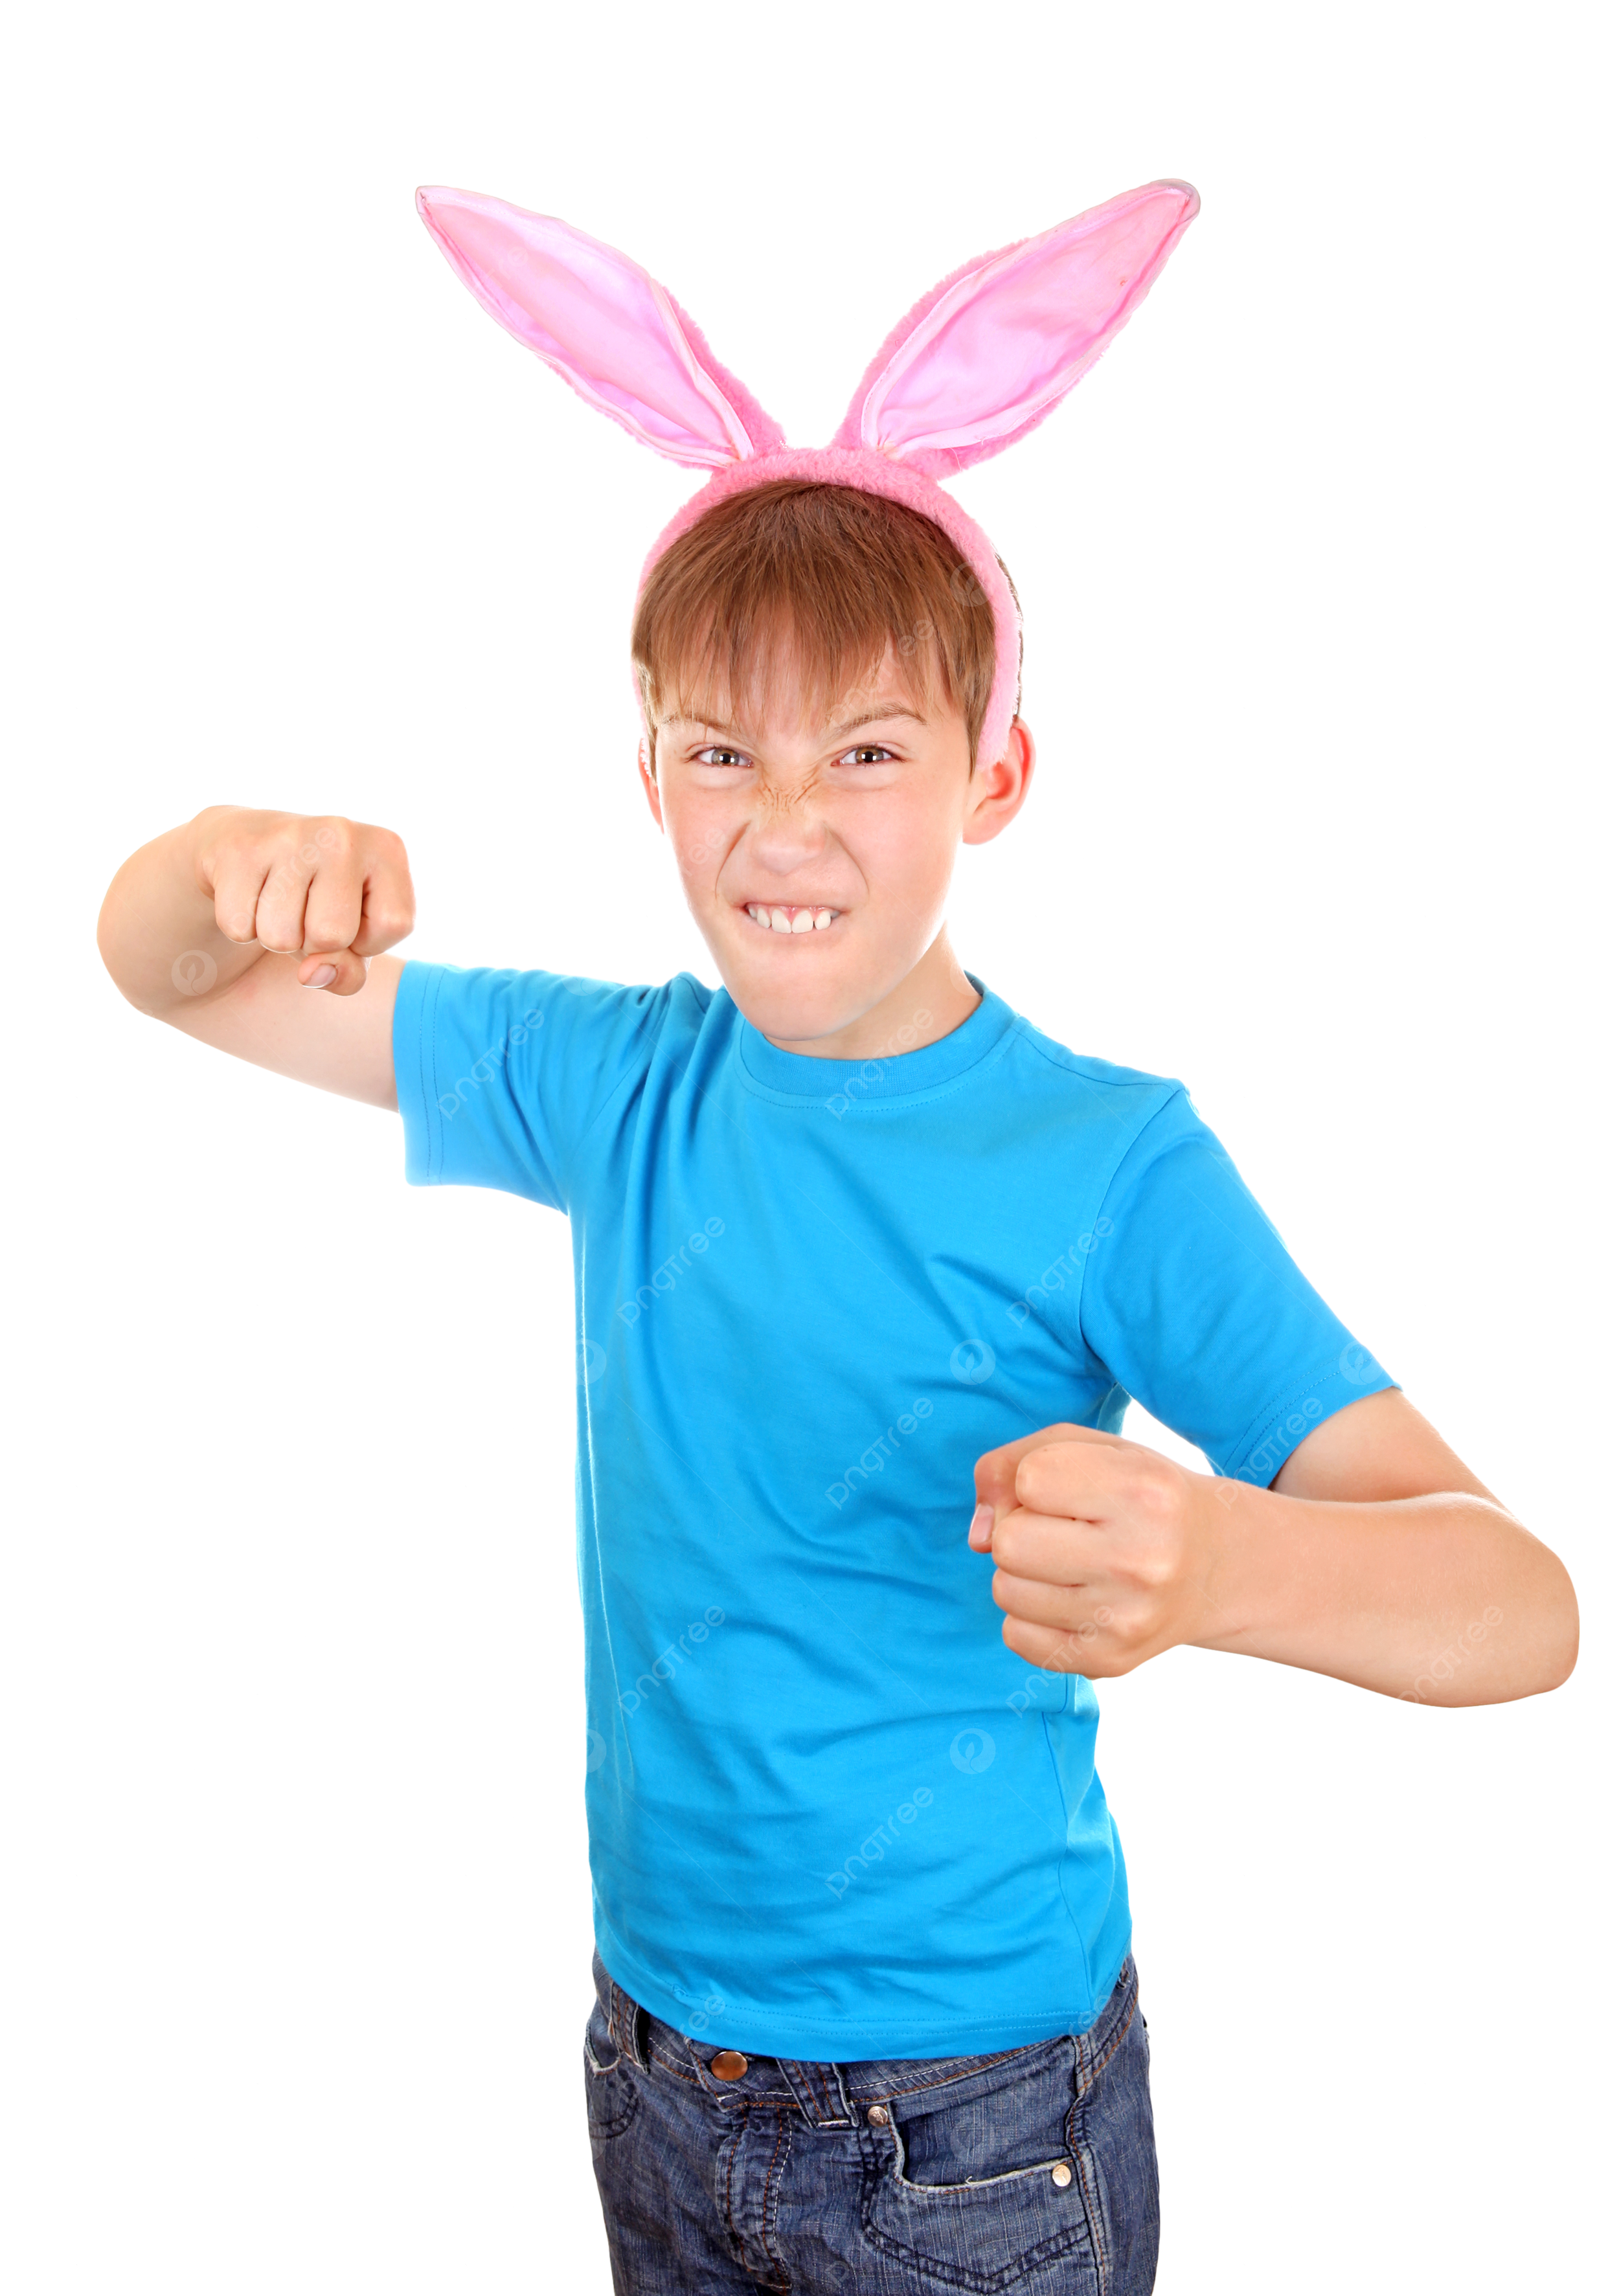 Kid with bunny ears danger little imitate hare png transparent image and clipart for free download